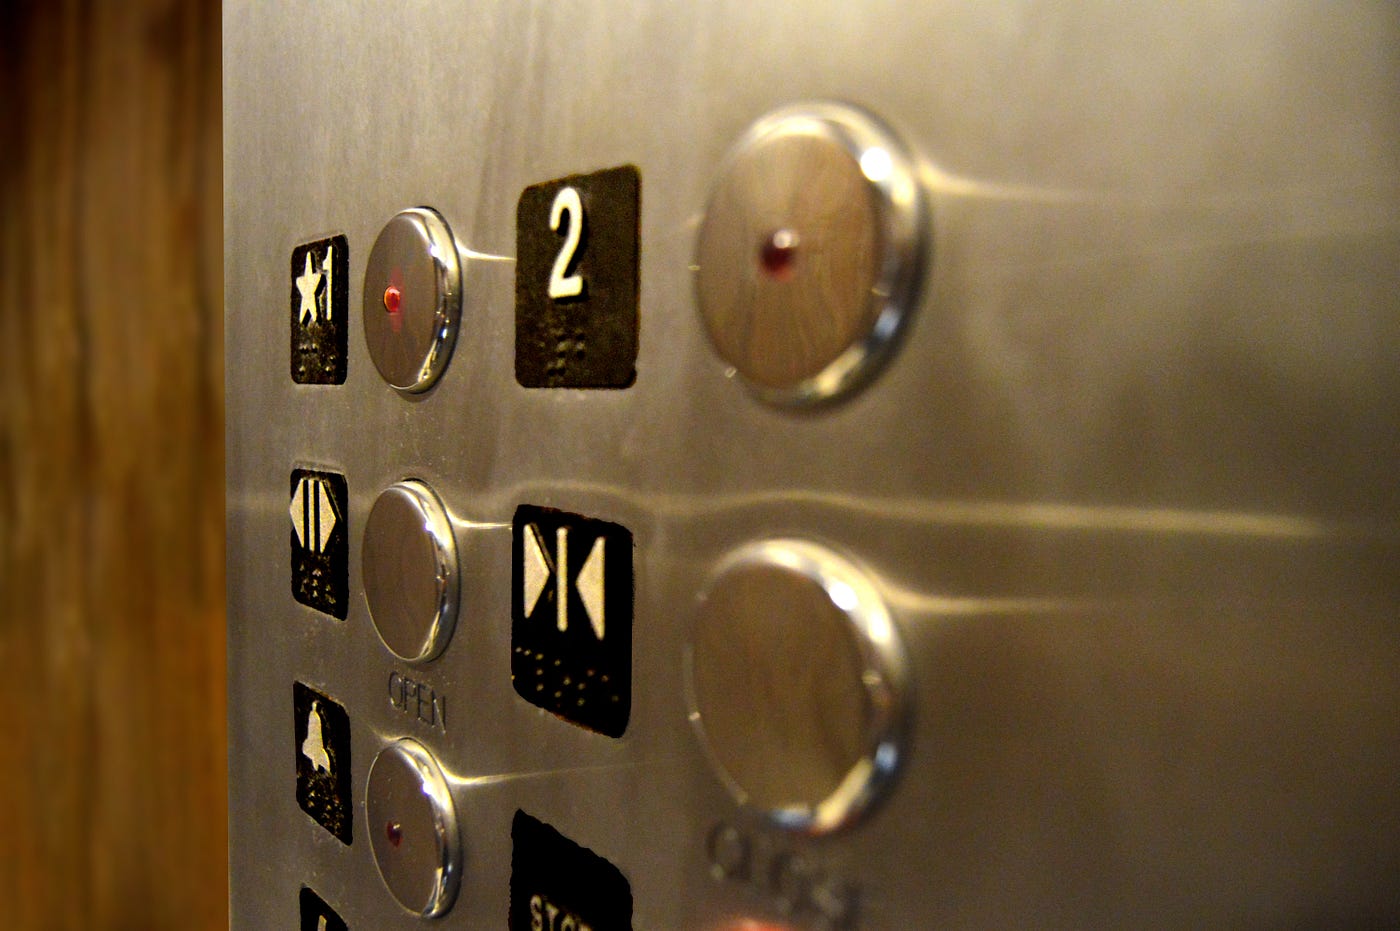 Solved 1. An elevator is designed to tolerate a maximum